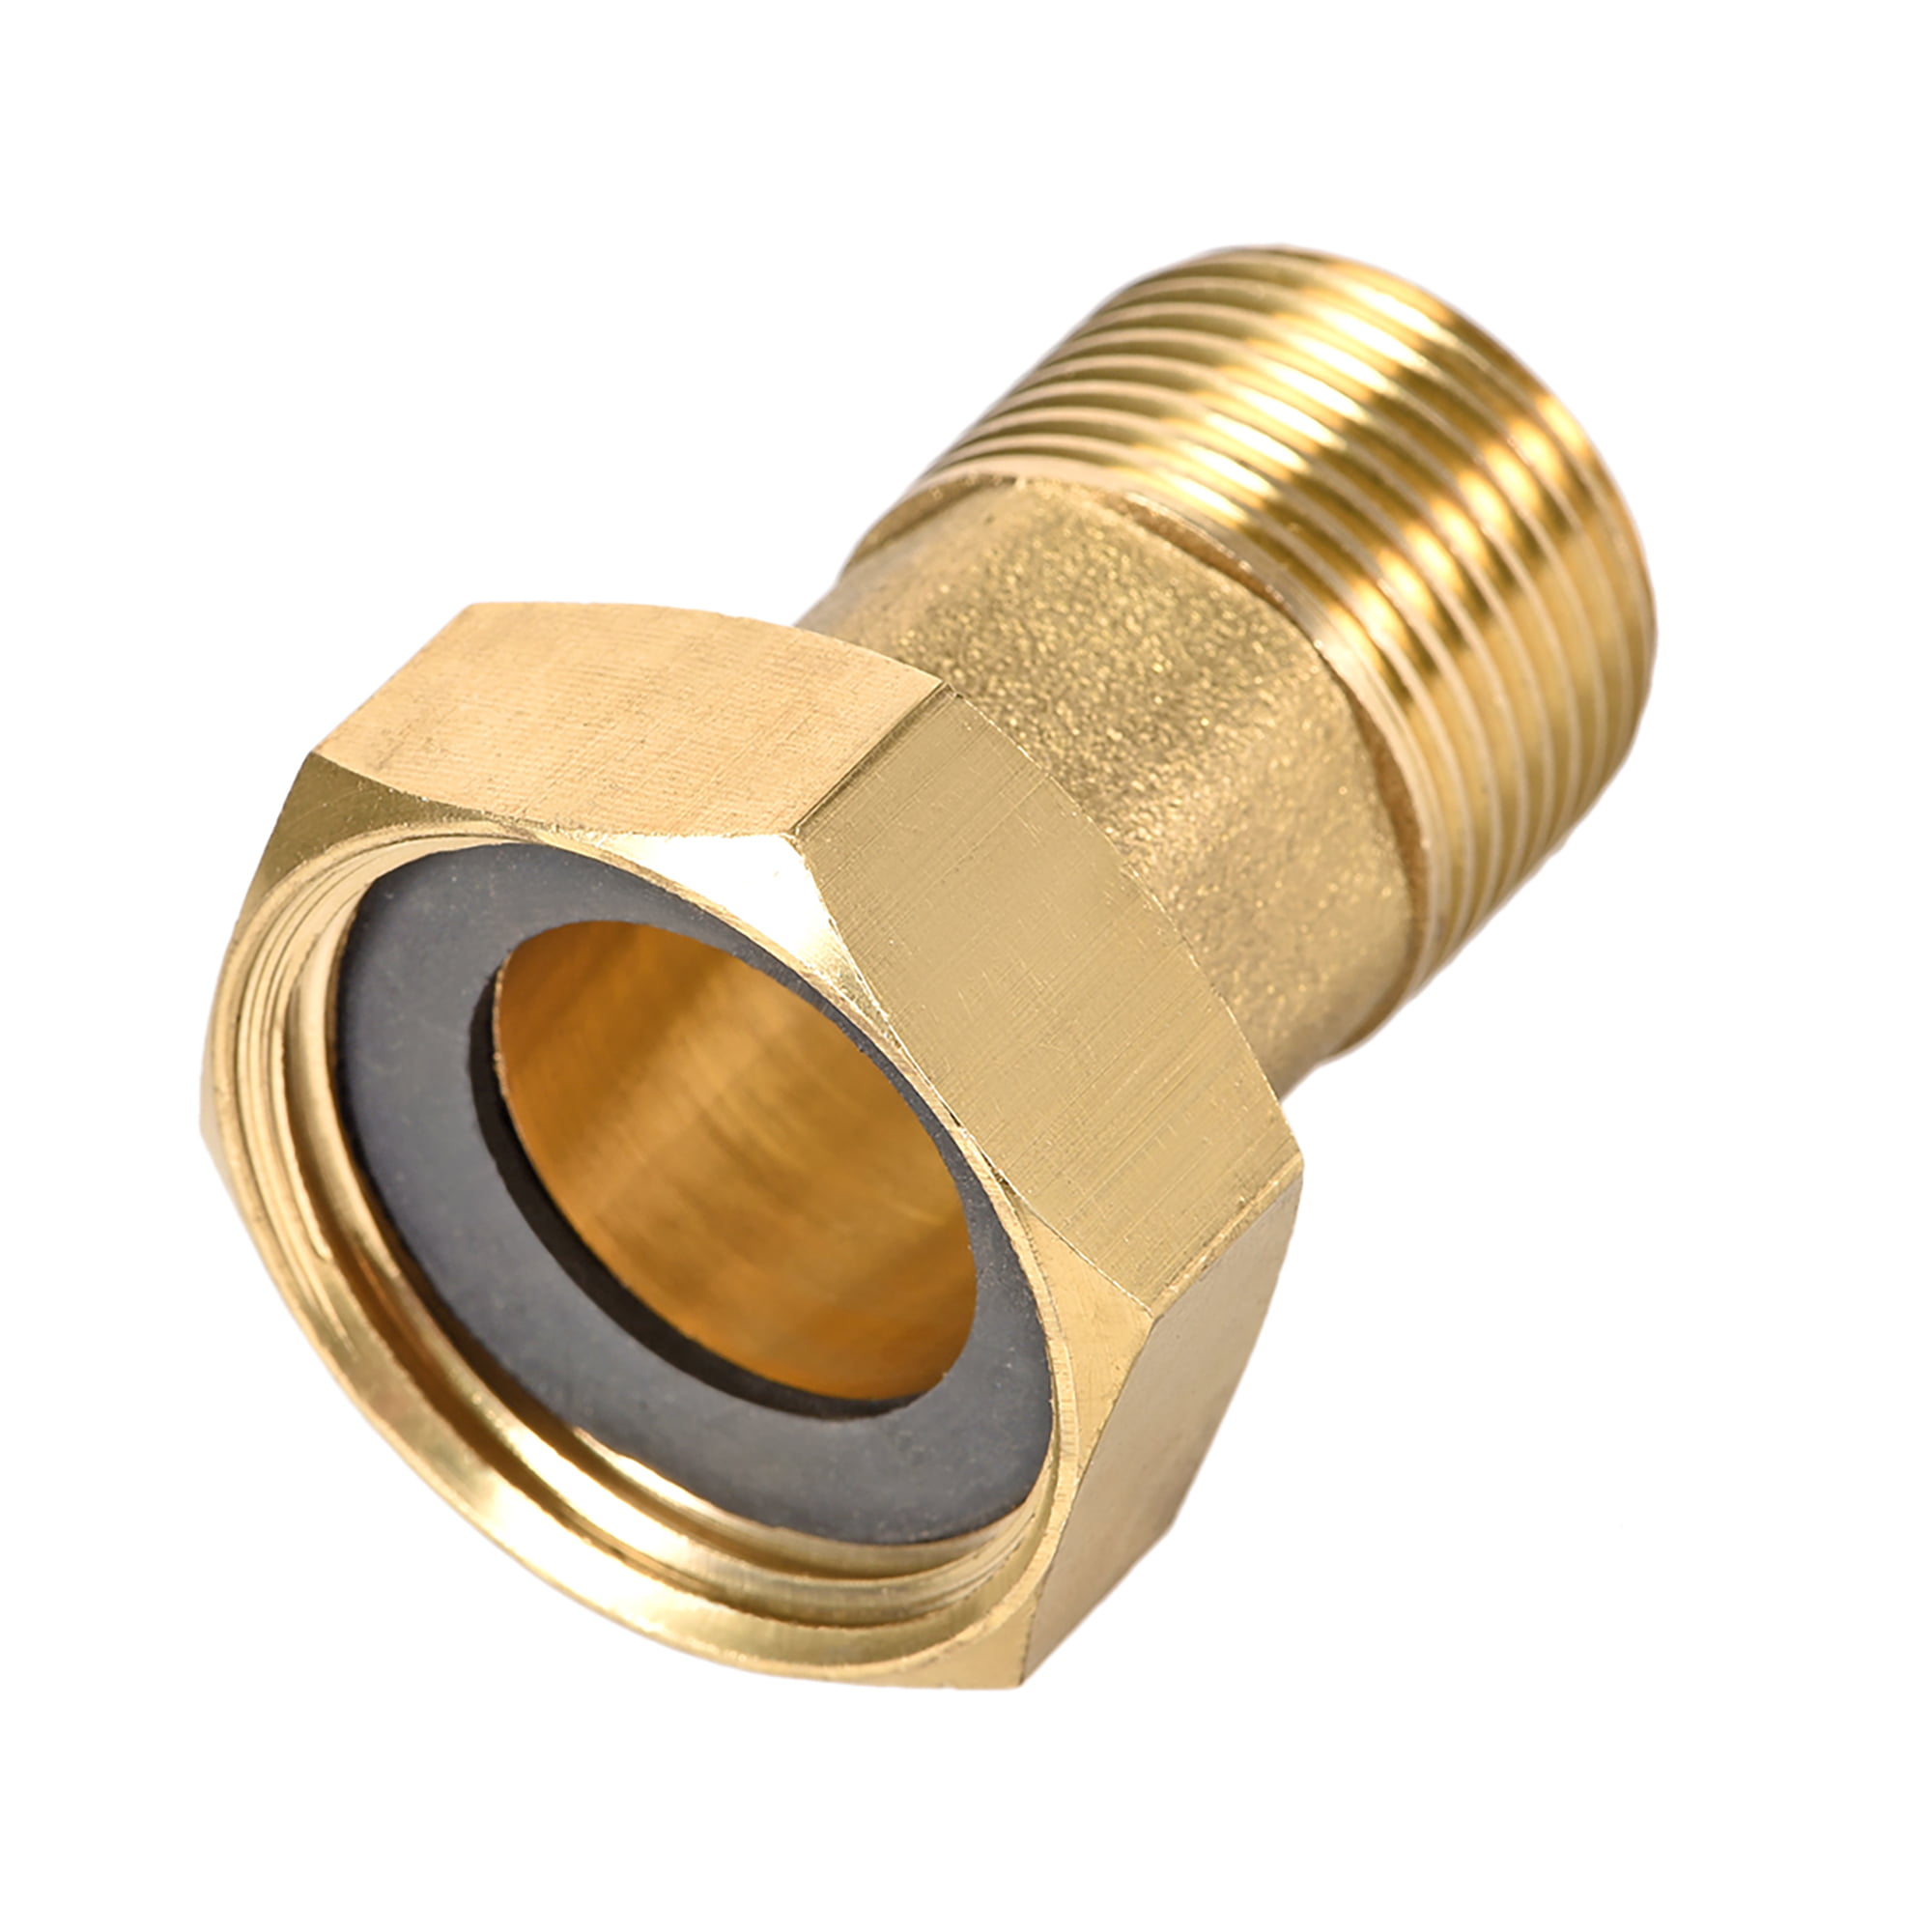 1/2" 3/4" 1" Thread Pipe Connection Female Screwed Fittings Coupling Muff Brass 